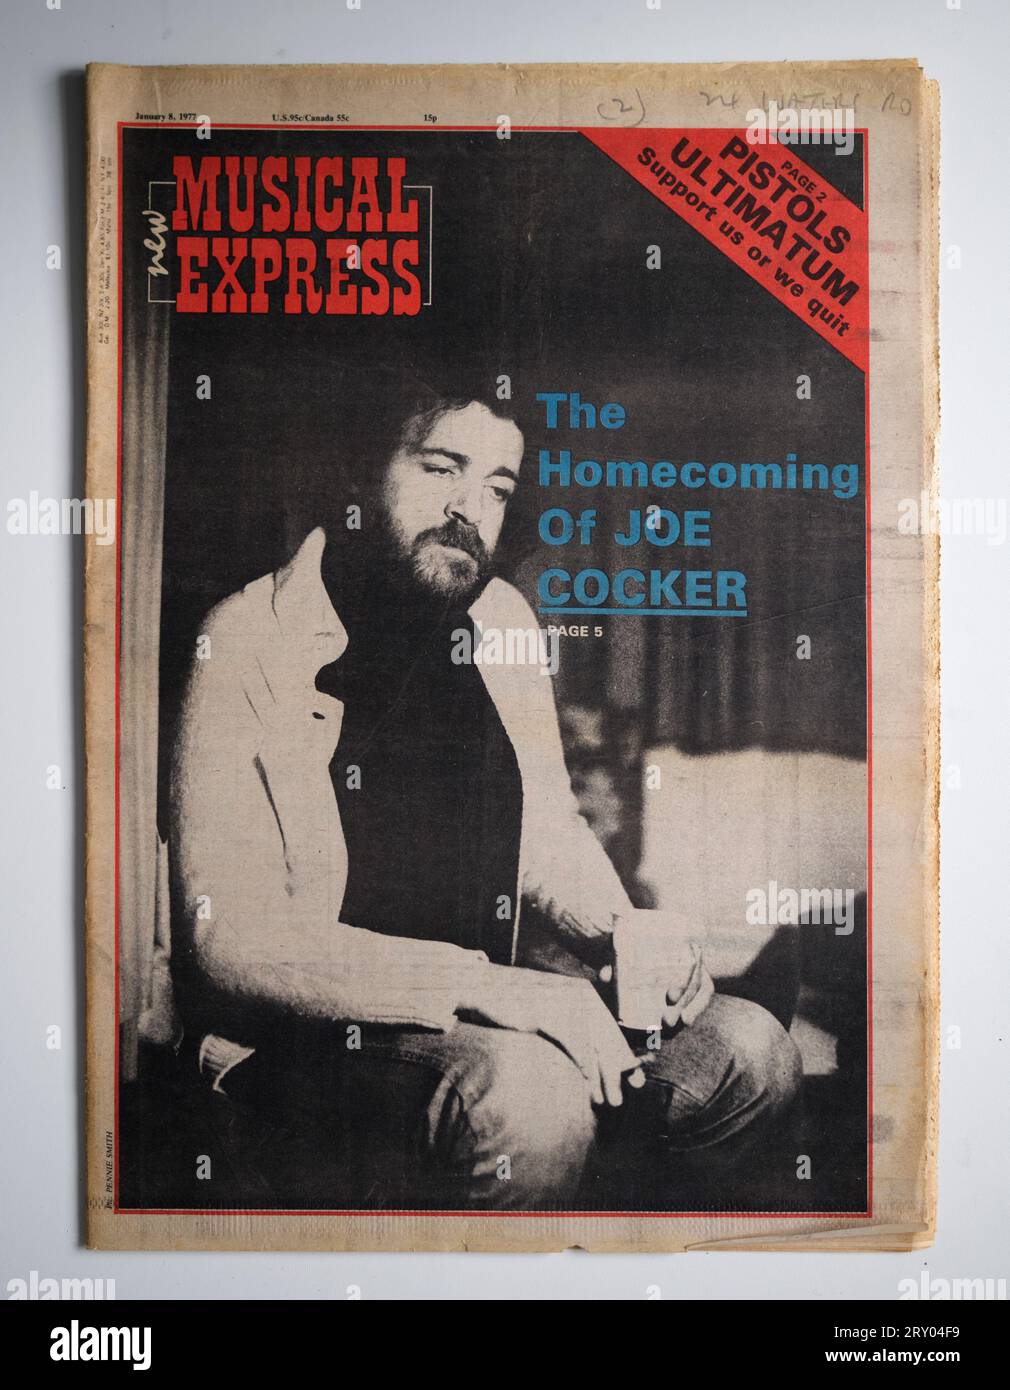 1970s issue of NME New Musical Express Music Paper Joe Cocker Cover Stock Photo